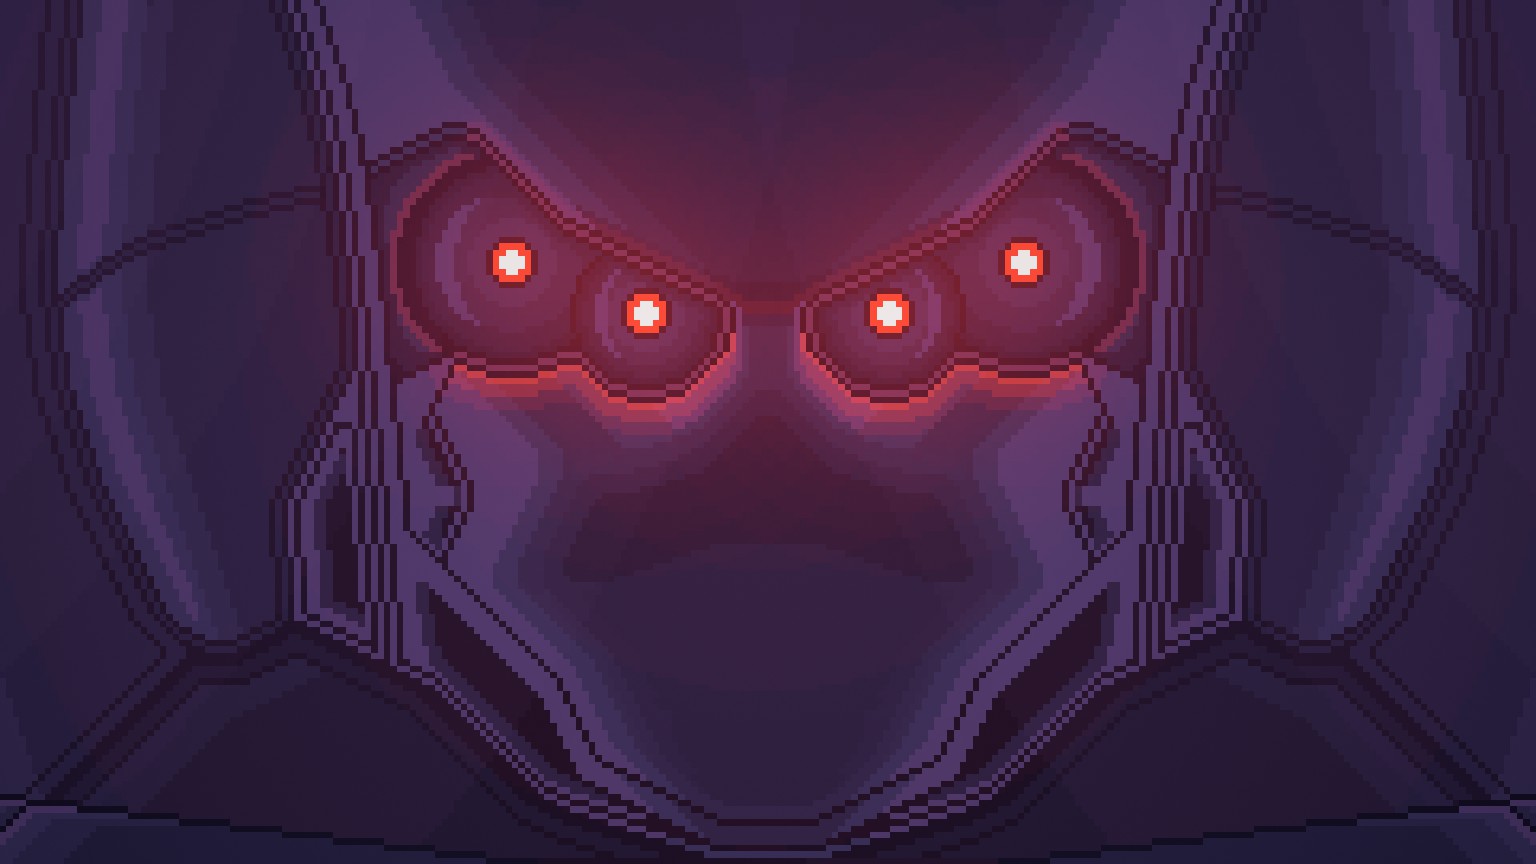 A close up of the Titanium Hounds face, four red eyes are shown and the main colour is a dark purple.